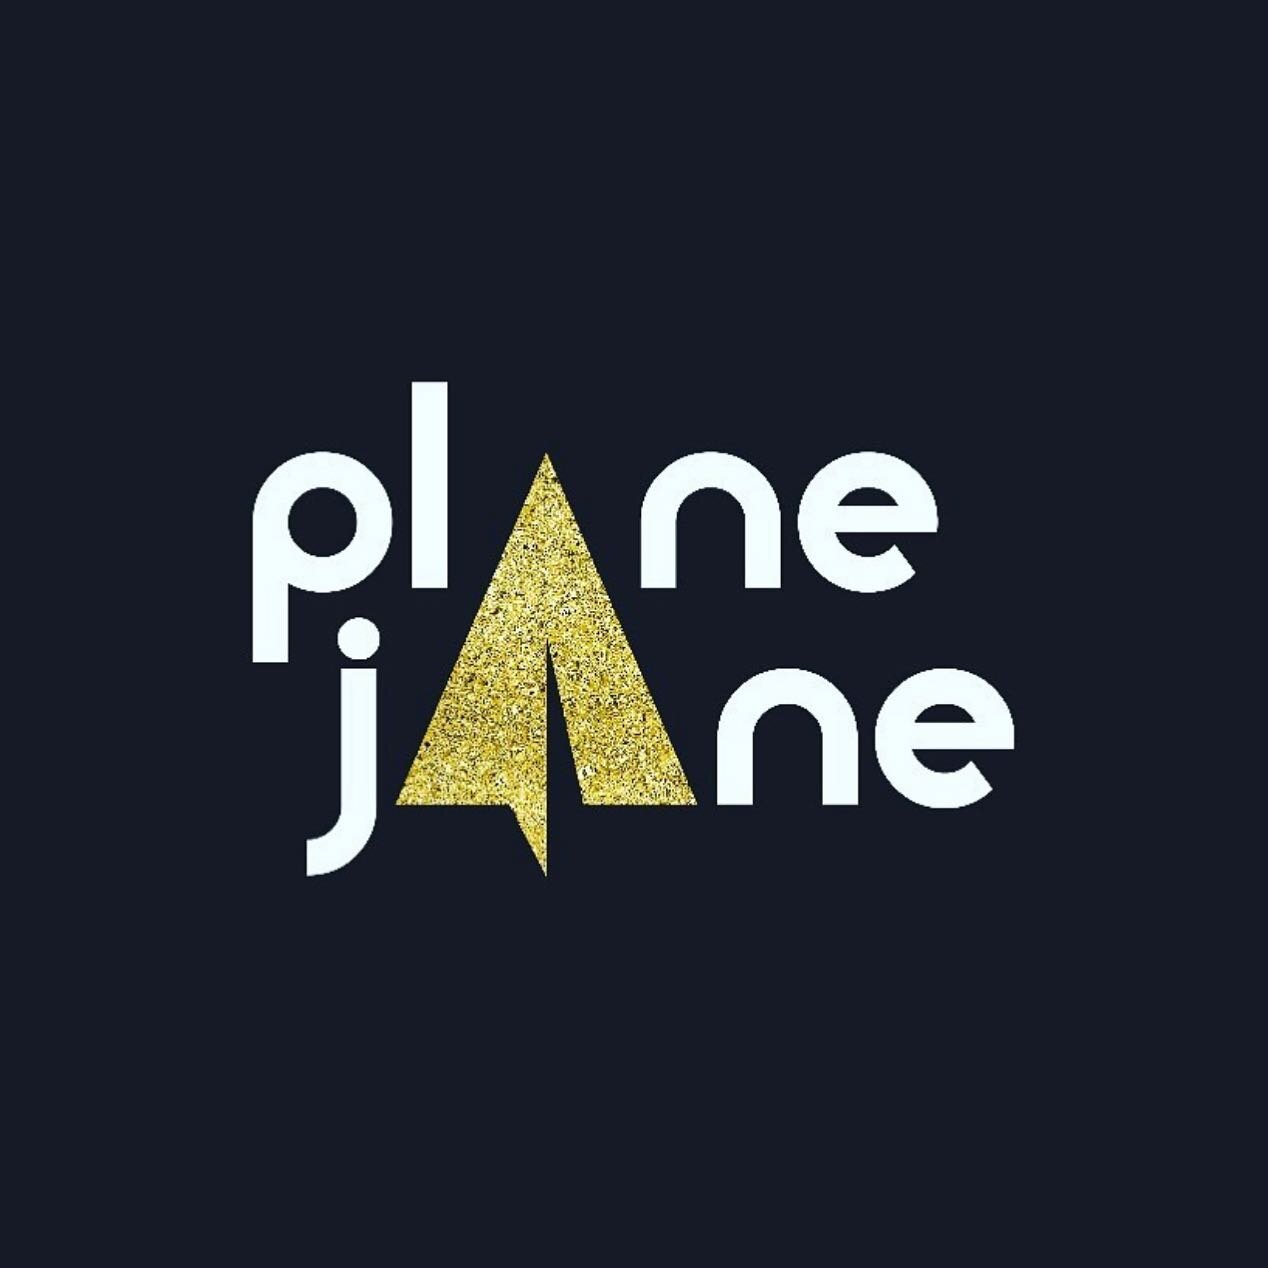 Get ready, Dickerson Road!!! The owner of @coneheadscw is opening a brand new bar this summer called @planejane615 🍸 

Follow them on Instagram for the latest news. In the meantime, we&rsquo;ll be counting down the days until we get to try out our n